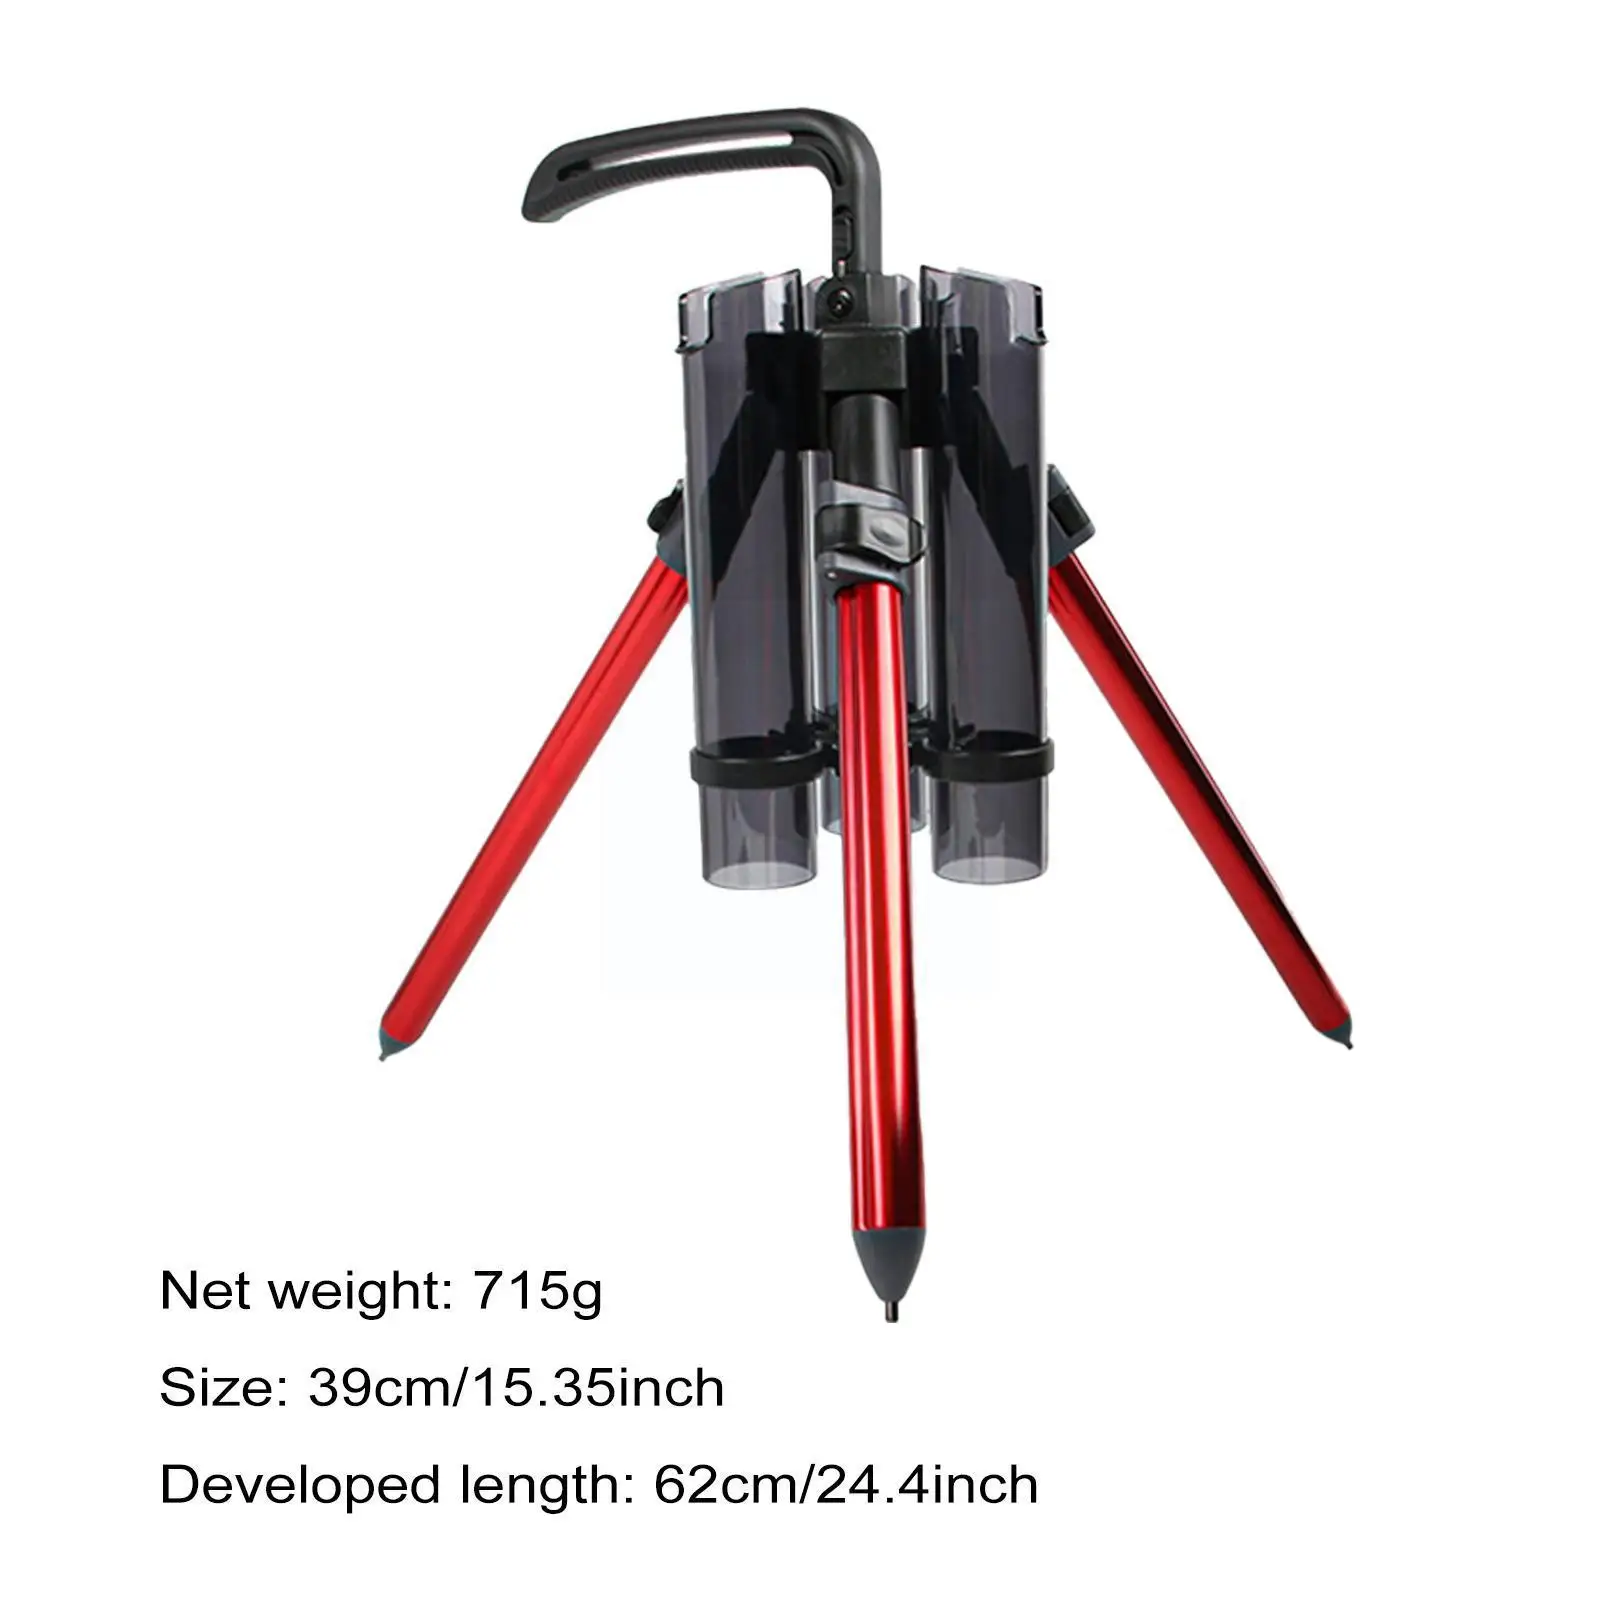 

PRESSO ROD STAND 530 Fishing Rod Bracket Tripod Stand Fishing Support Rod Folding Accessories Outdoor Portable Fishing I2R6